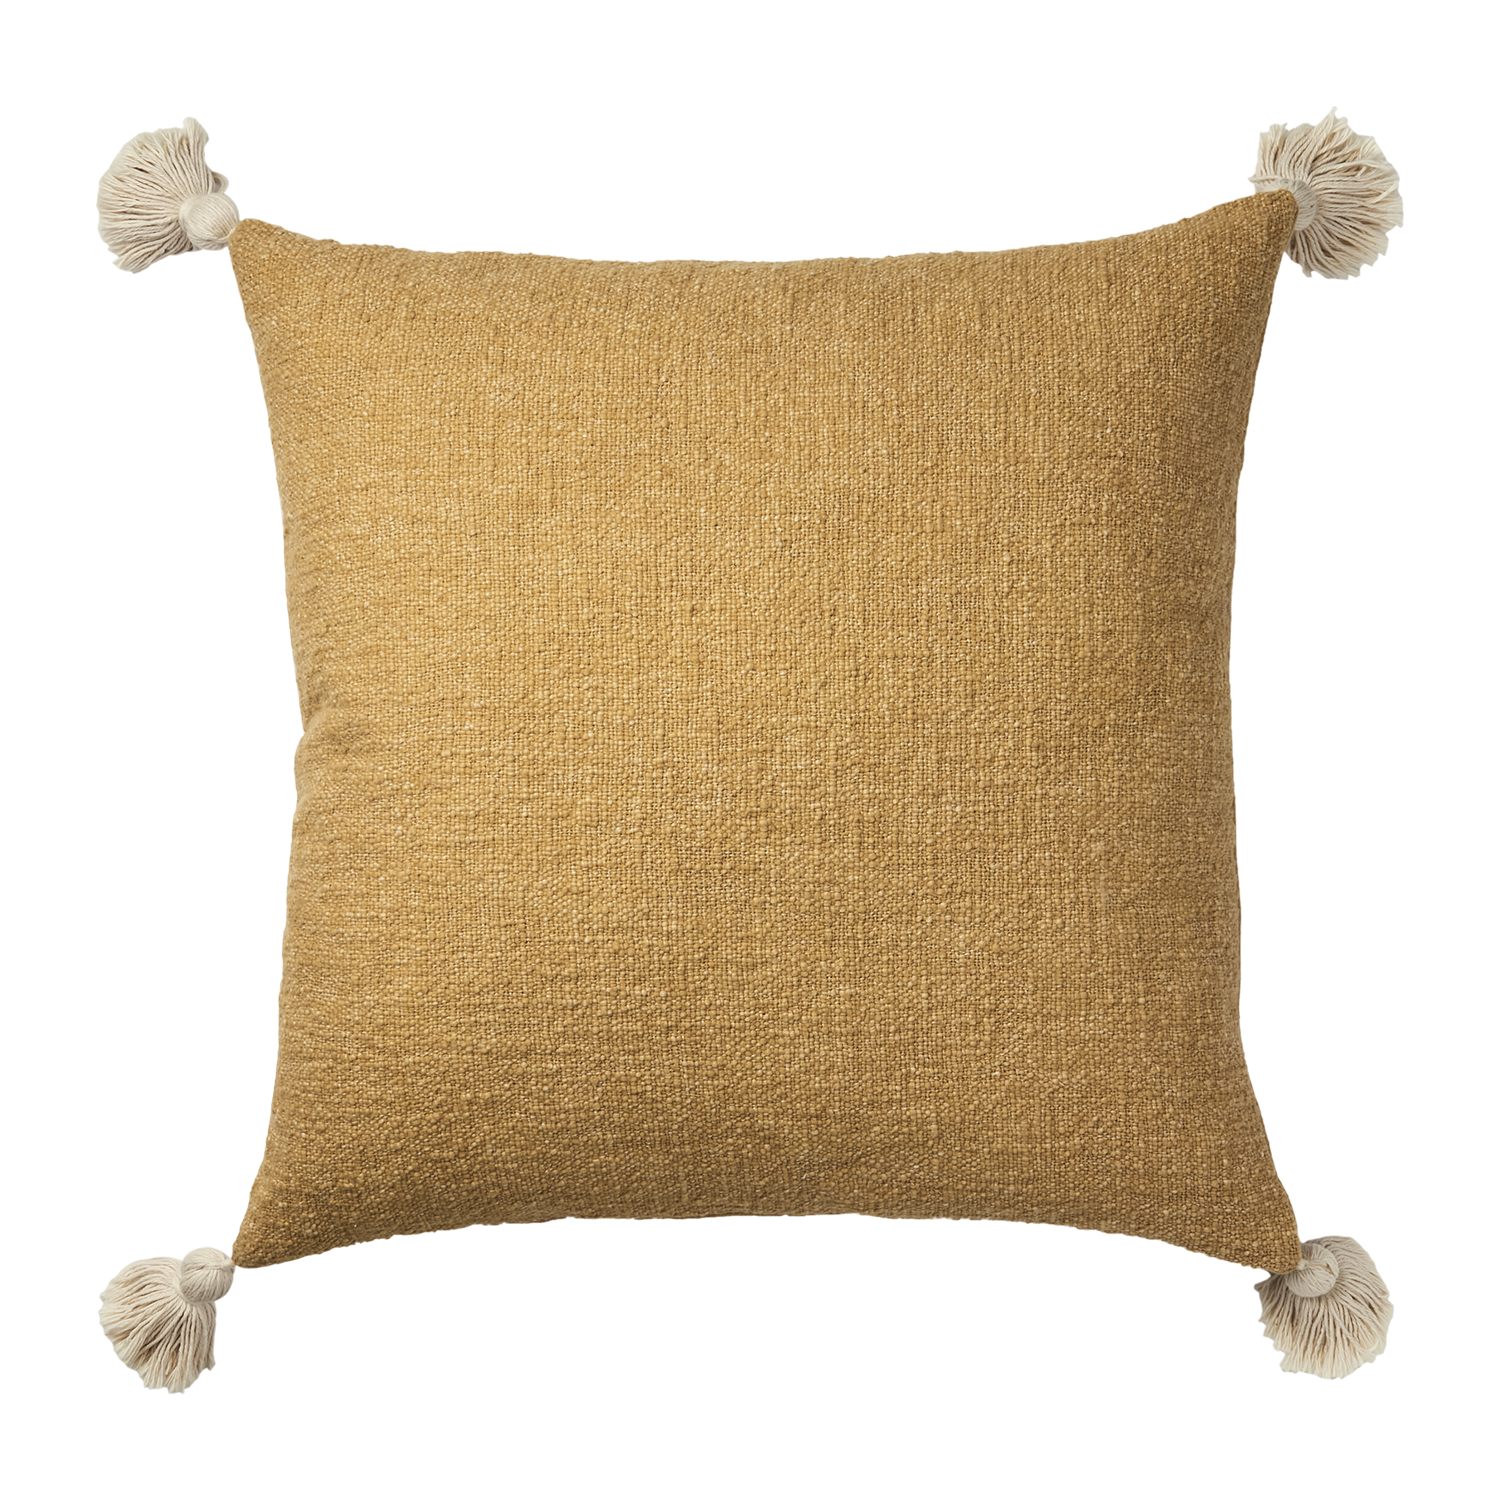 Cushion Cover Lolly Mustard